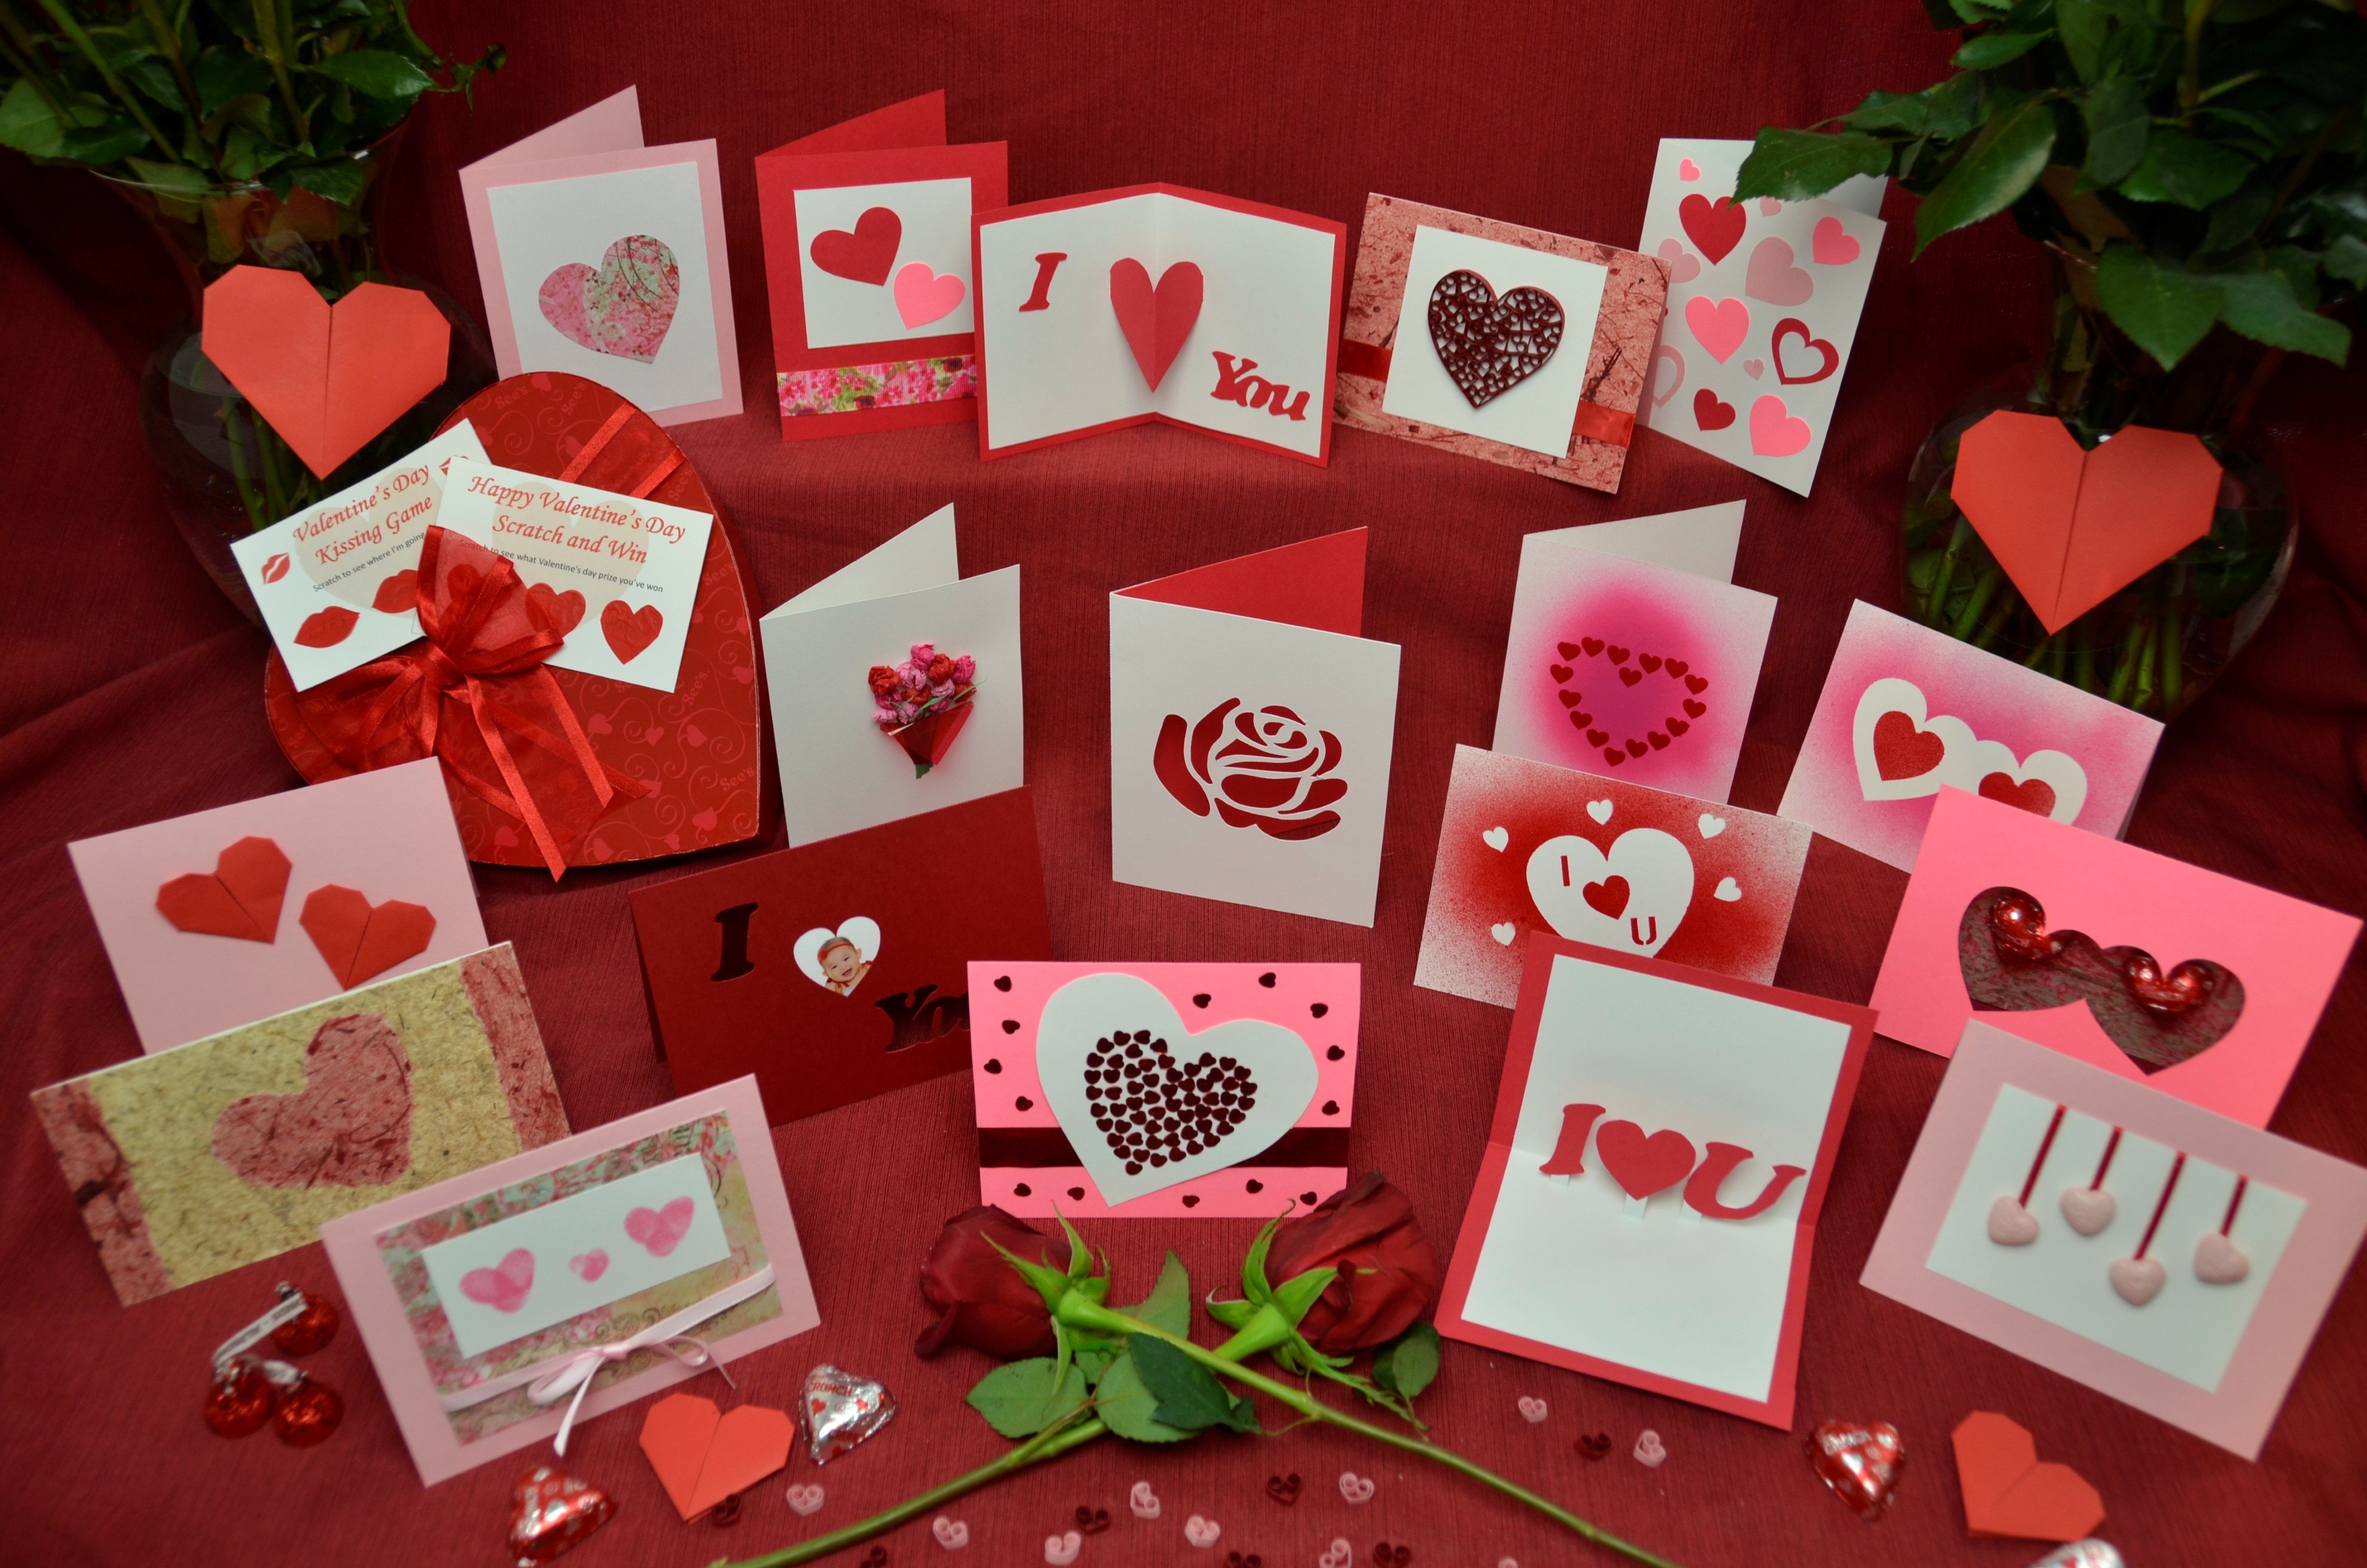 10 Elegant Great Ideas For Valentines Day top 10 ideas for valentines day cards creative pop up cards 15 2022